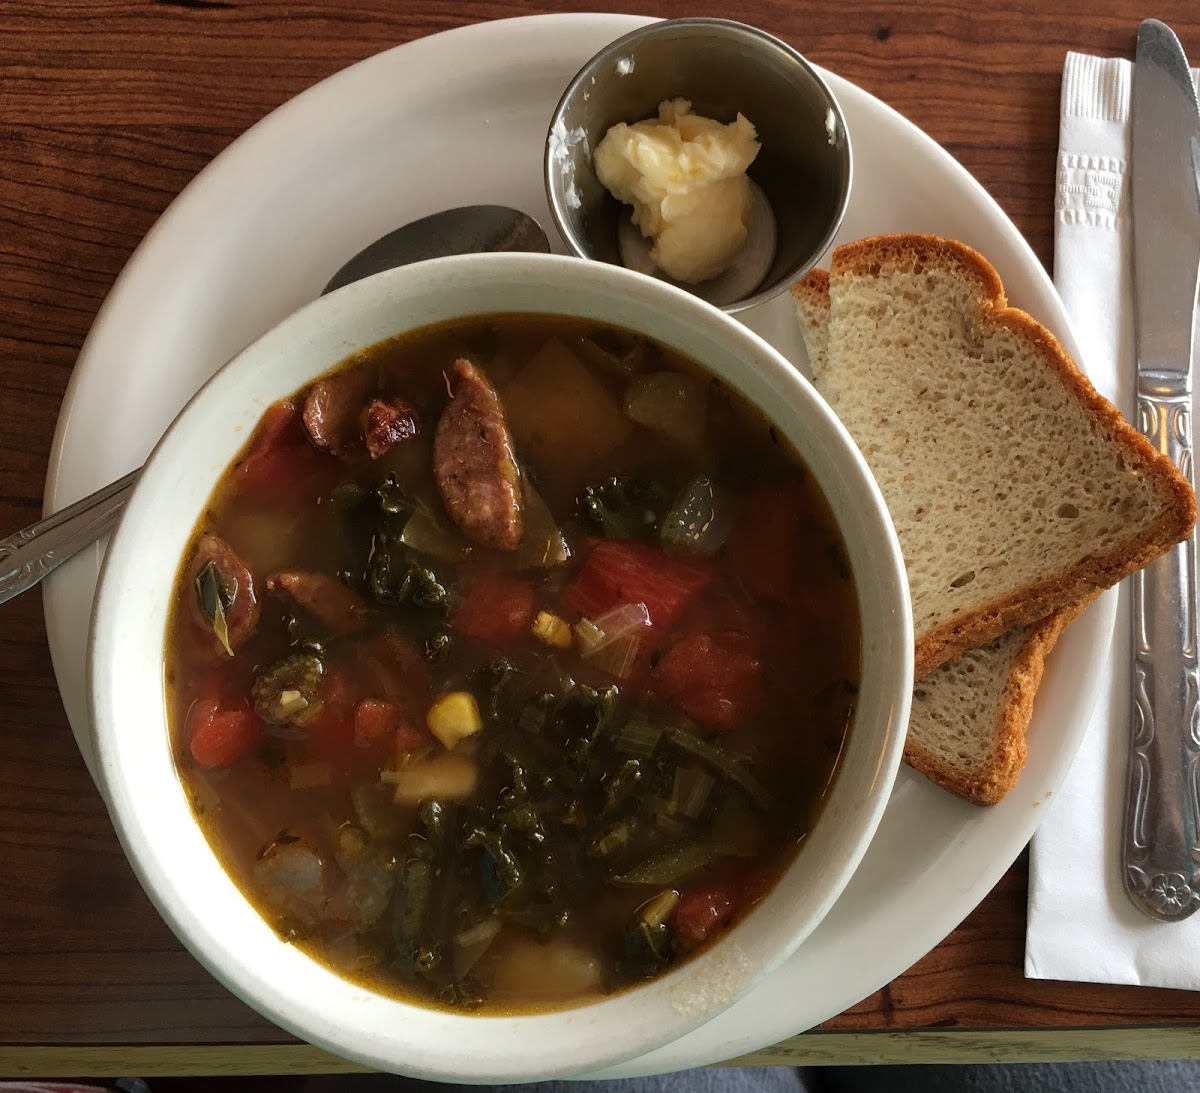 Andouille sausage and potato soup with gluten free bread.